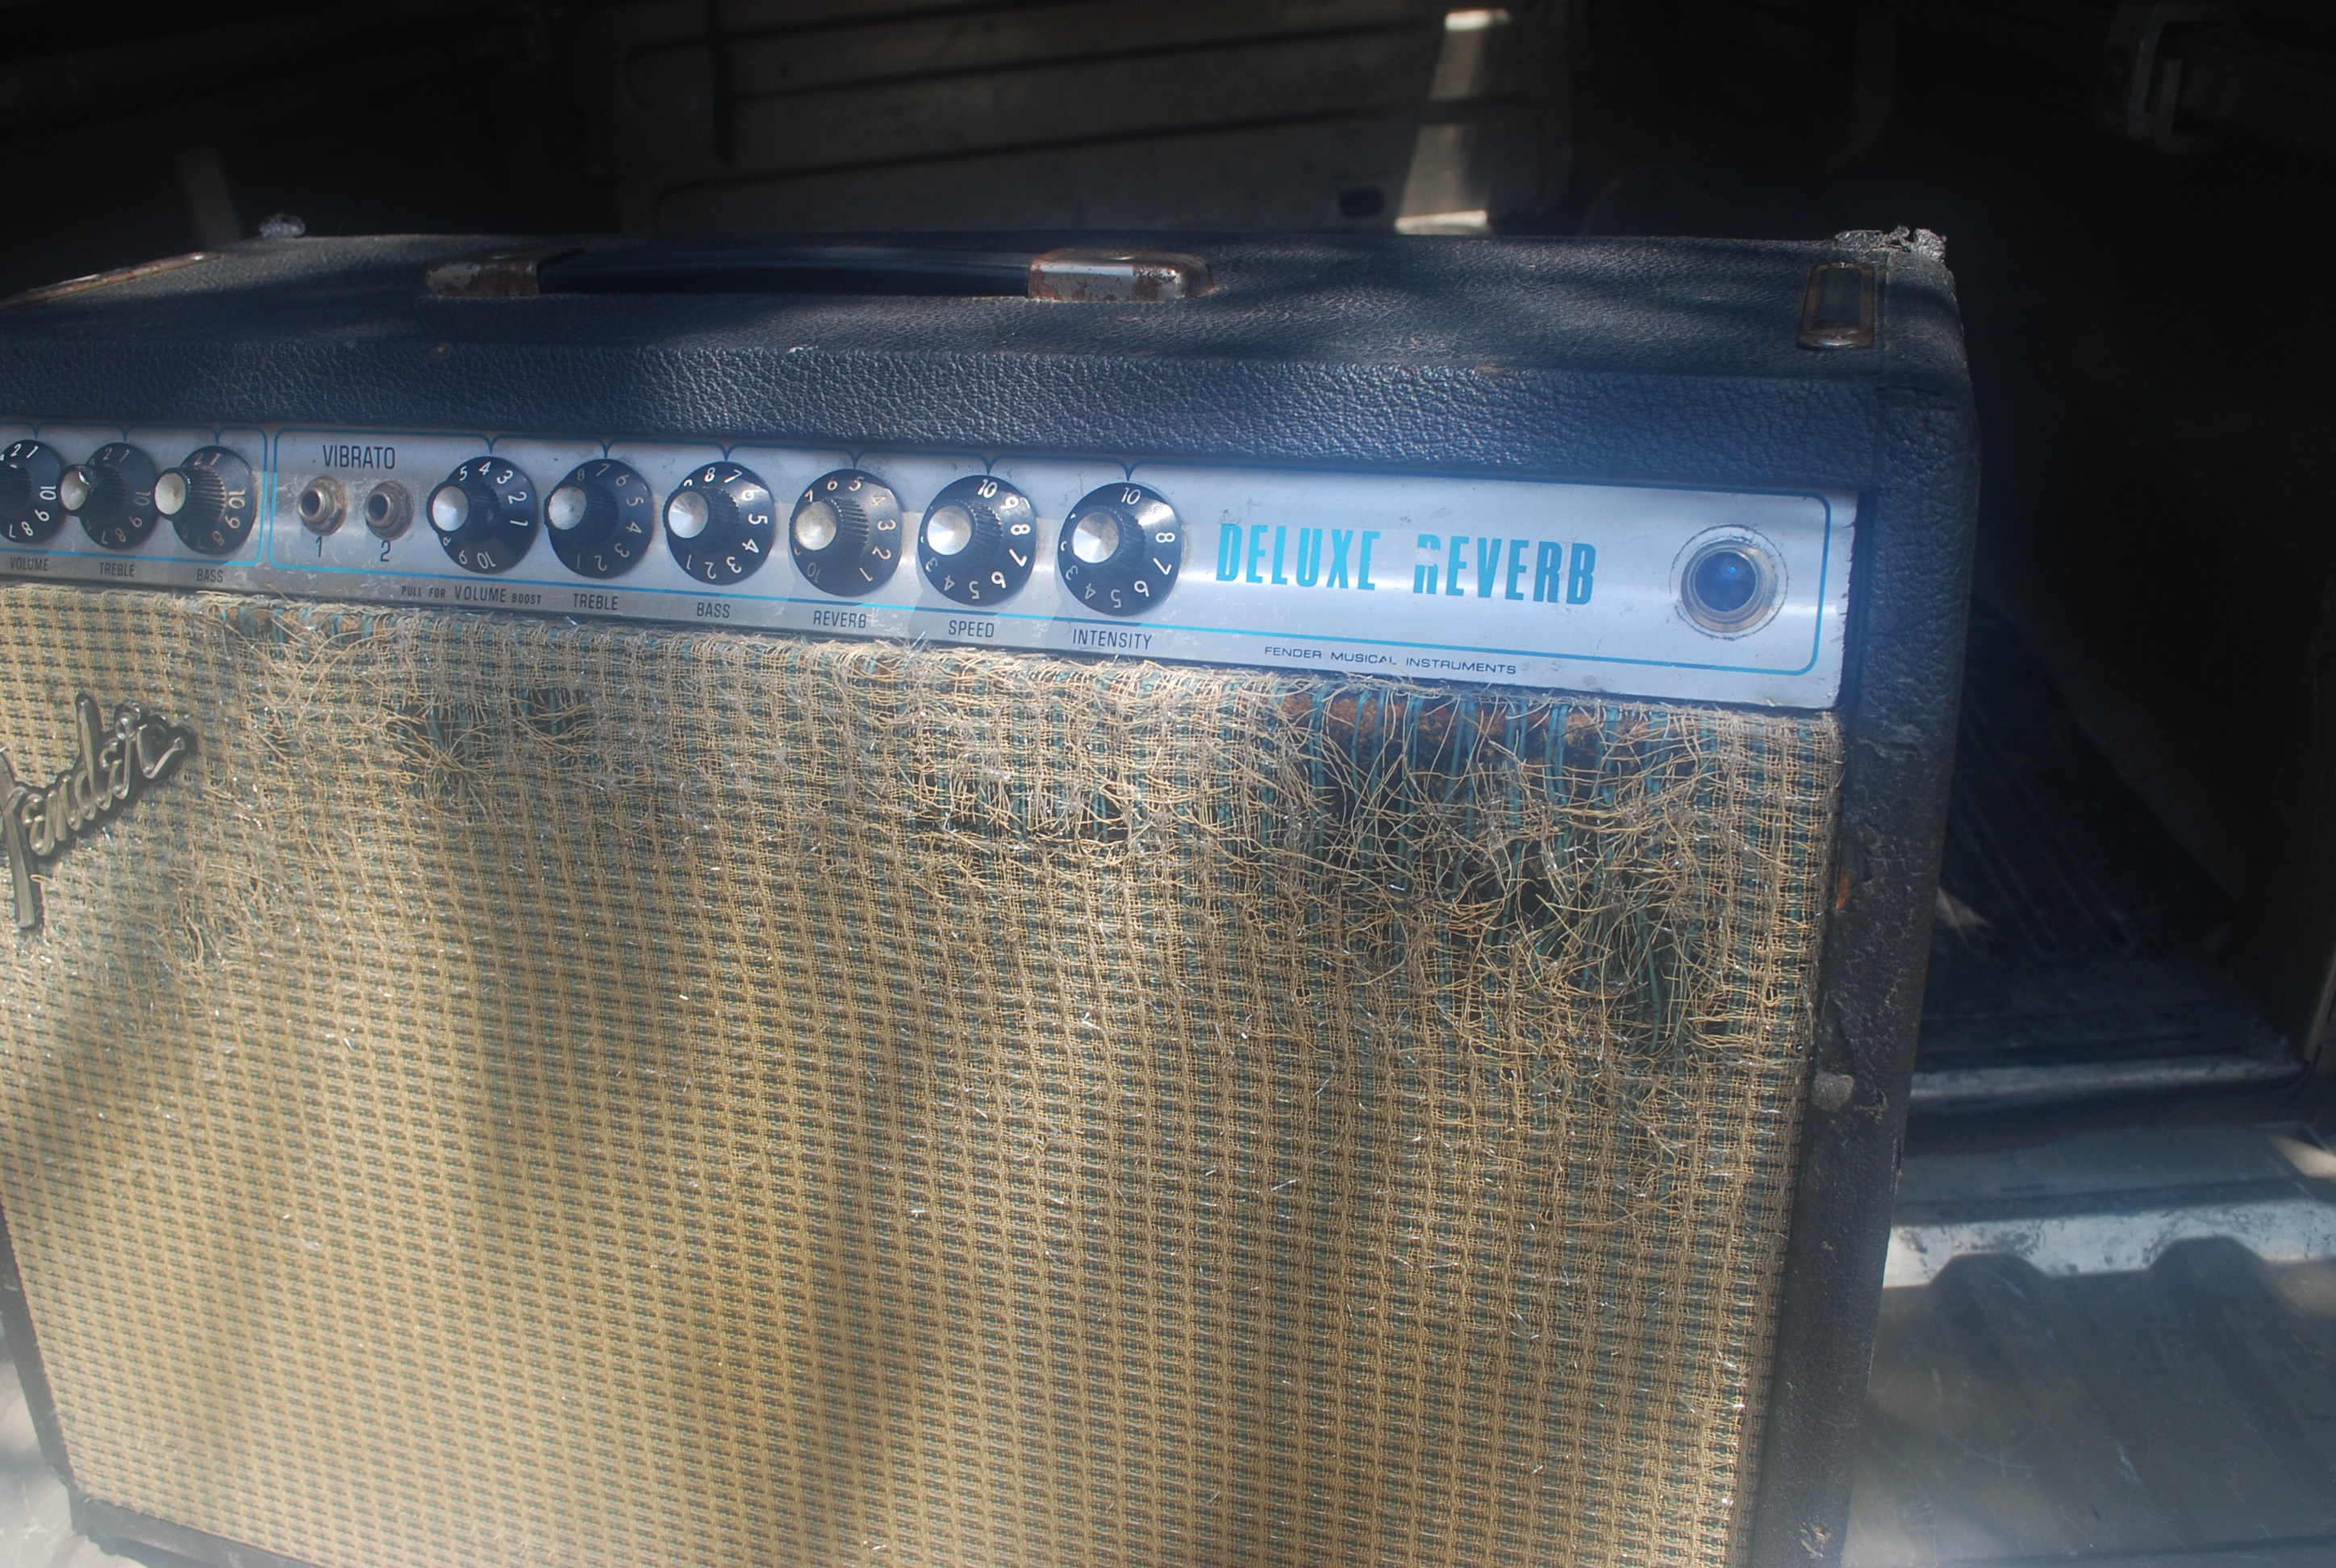 Grille damage on Deluxe Reverb, Austin Texas, July 27, 2015